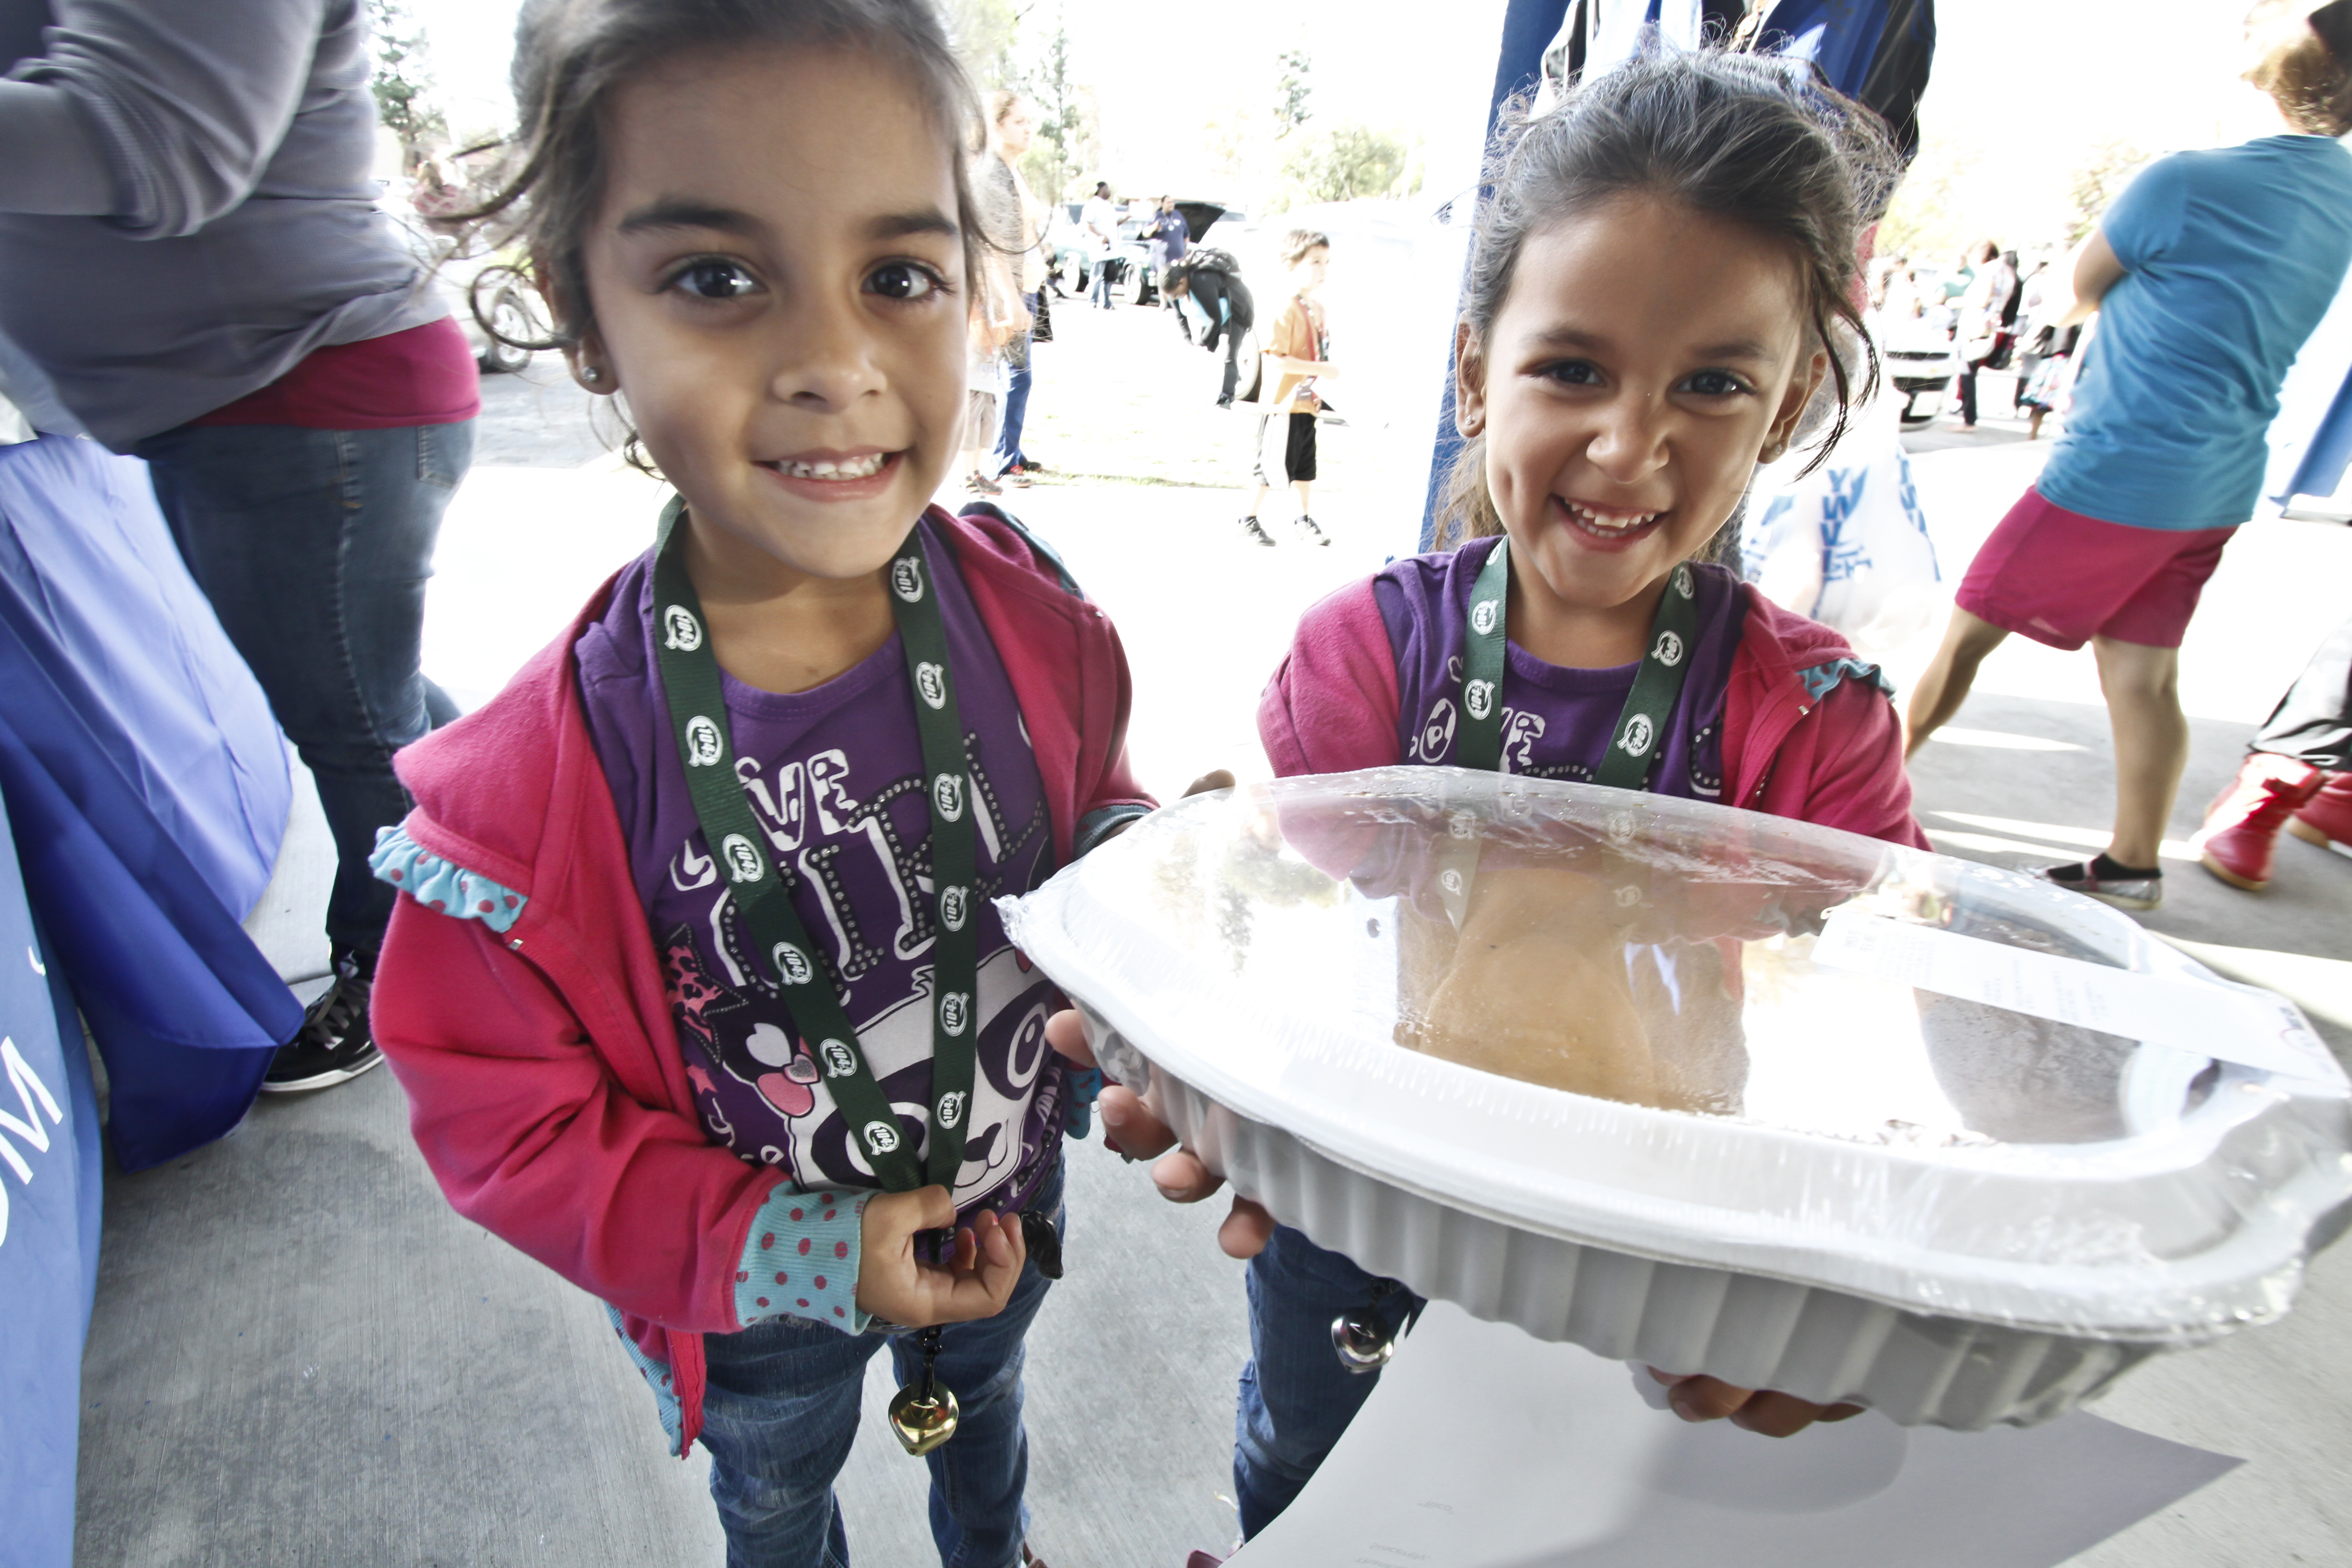 Recipients of a turkey dinner show off the large pumpkin pie they received Tuesday at Shiekh Shoes on East Highland Avenue in San Bernardino during the second annual Thanksgiving Giveback.